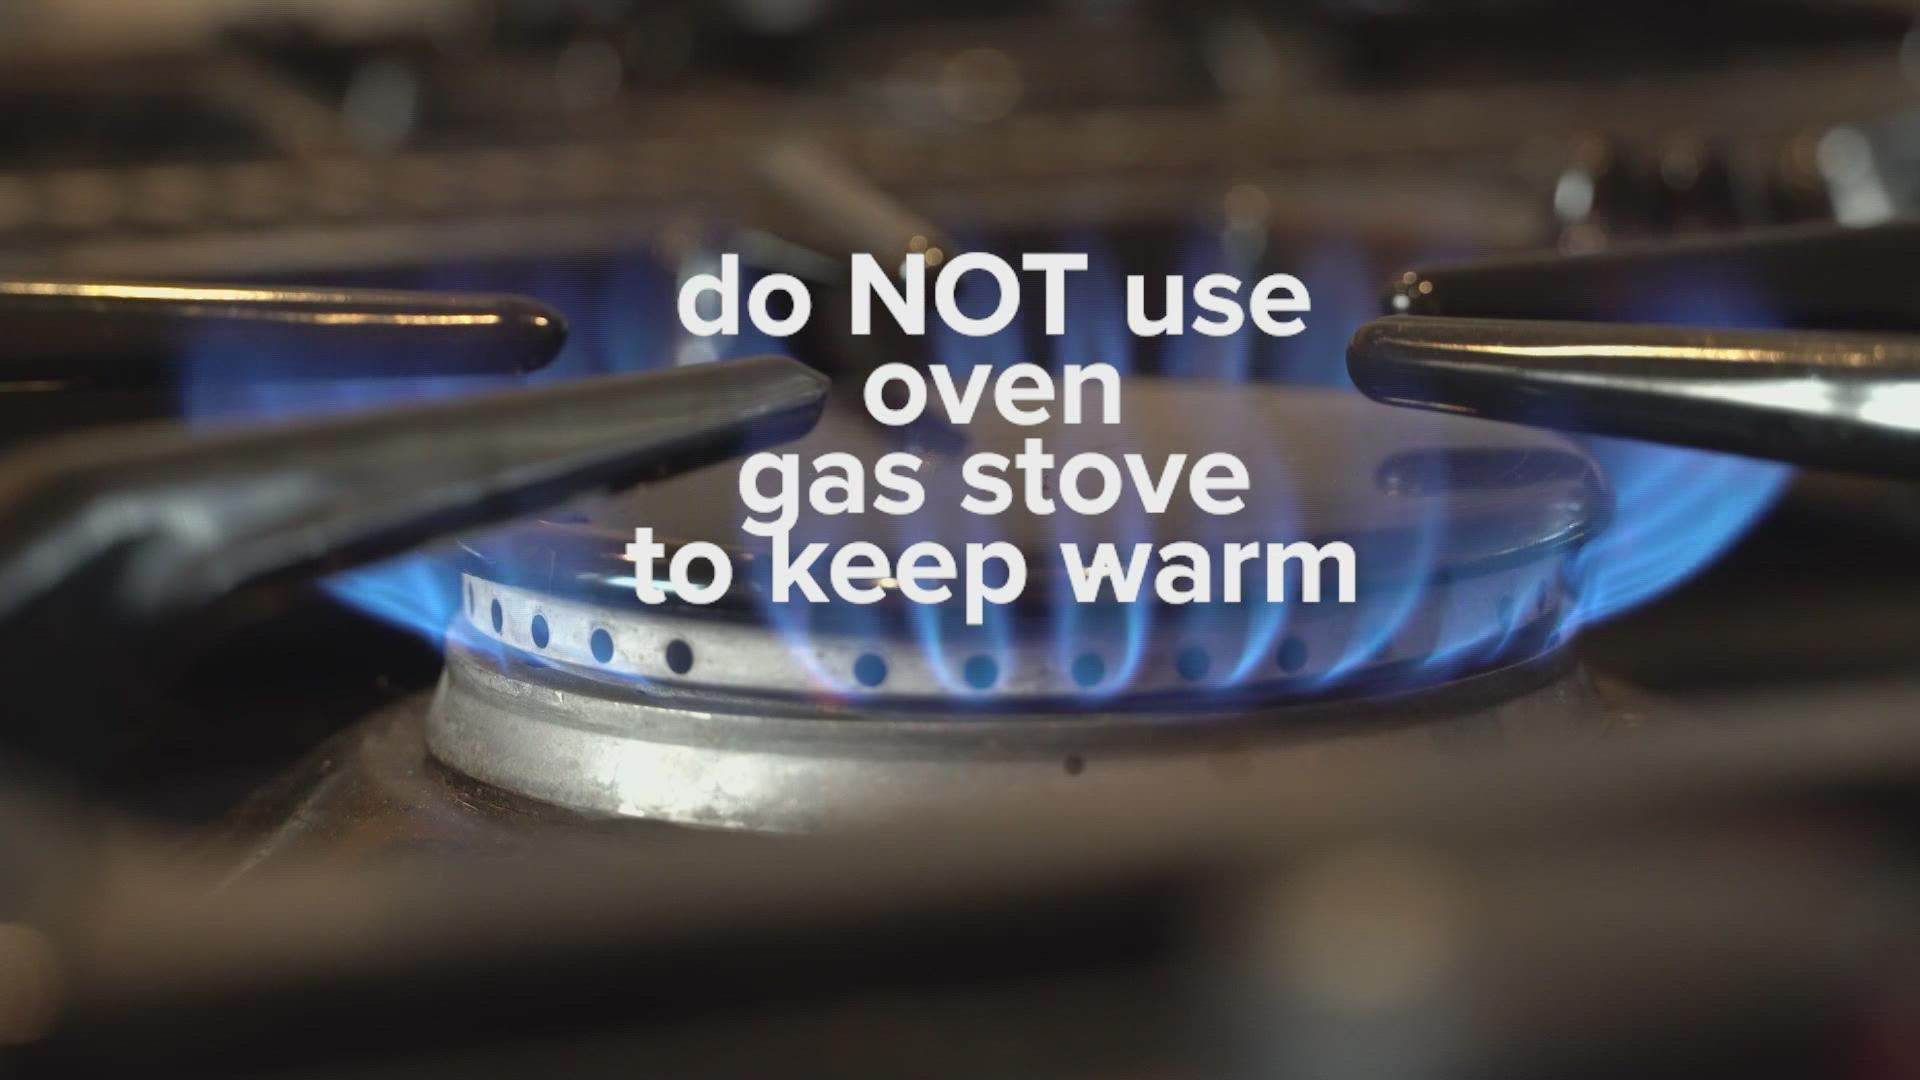 When the power does go out, people will do whatever they can to stay warm. But heating your home with a gas stove or running a generator inside can be deadly.